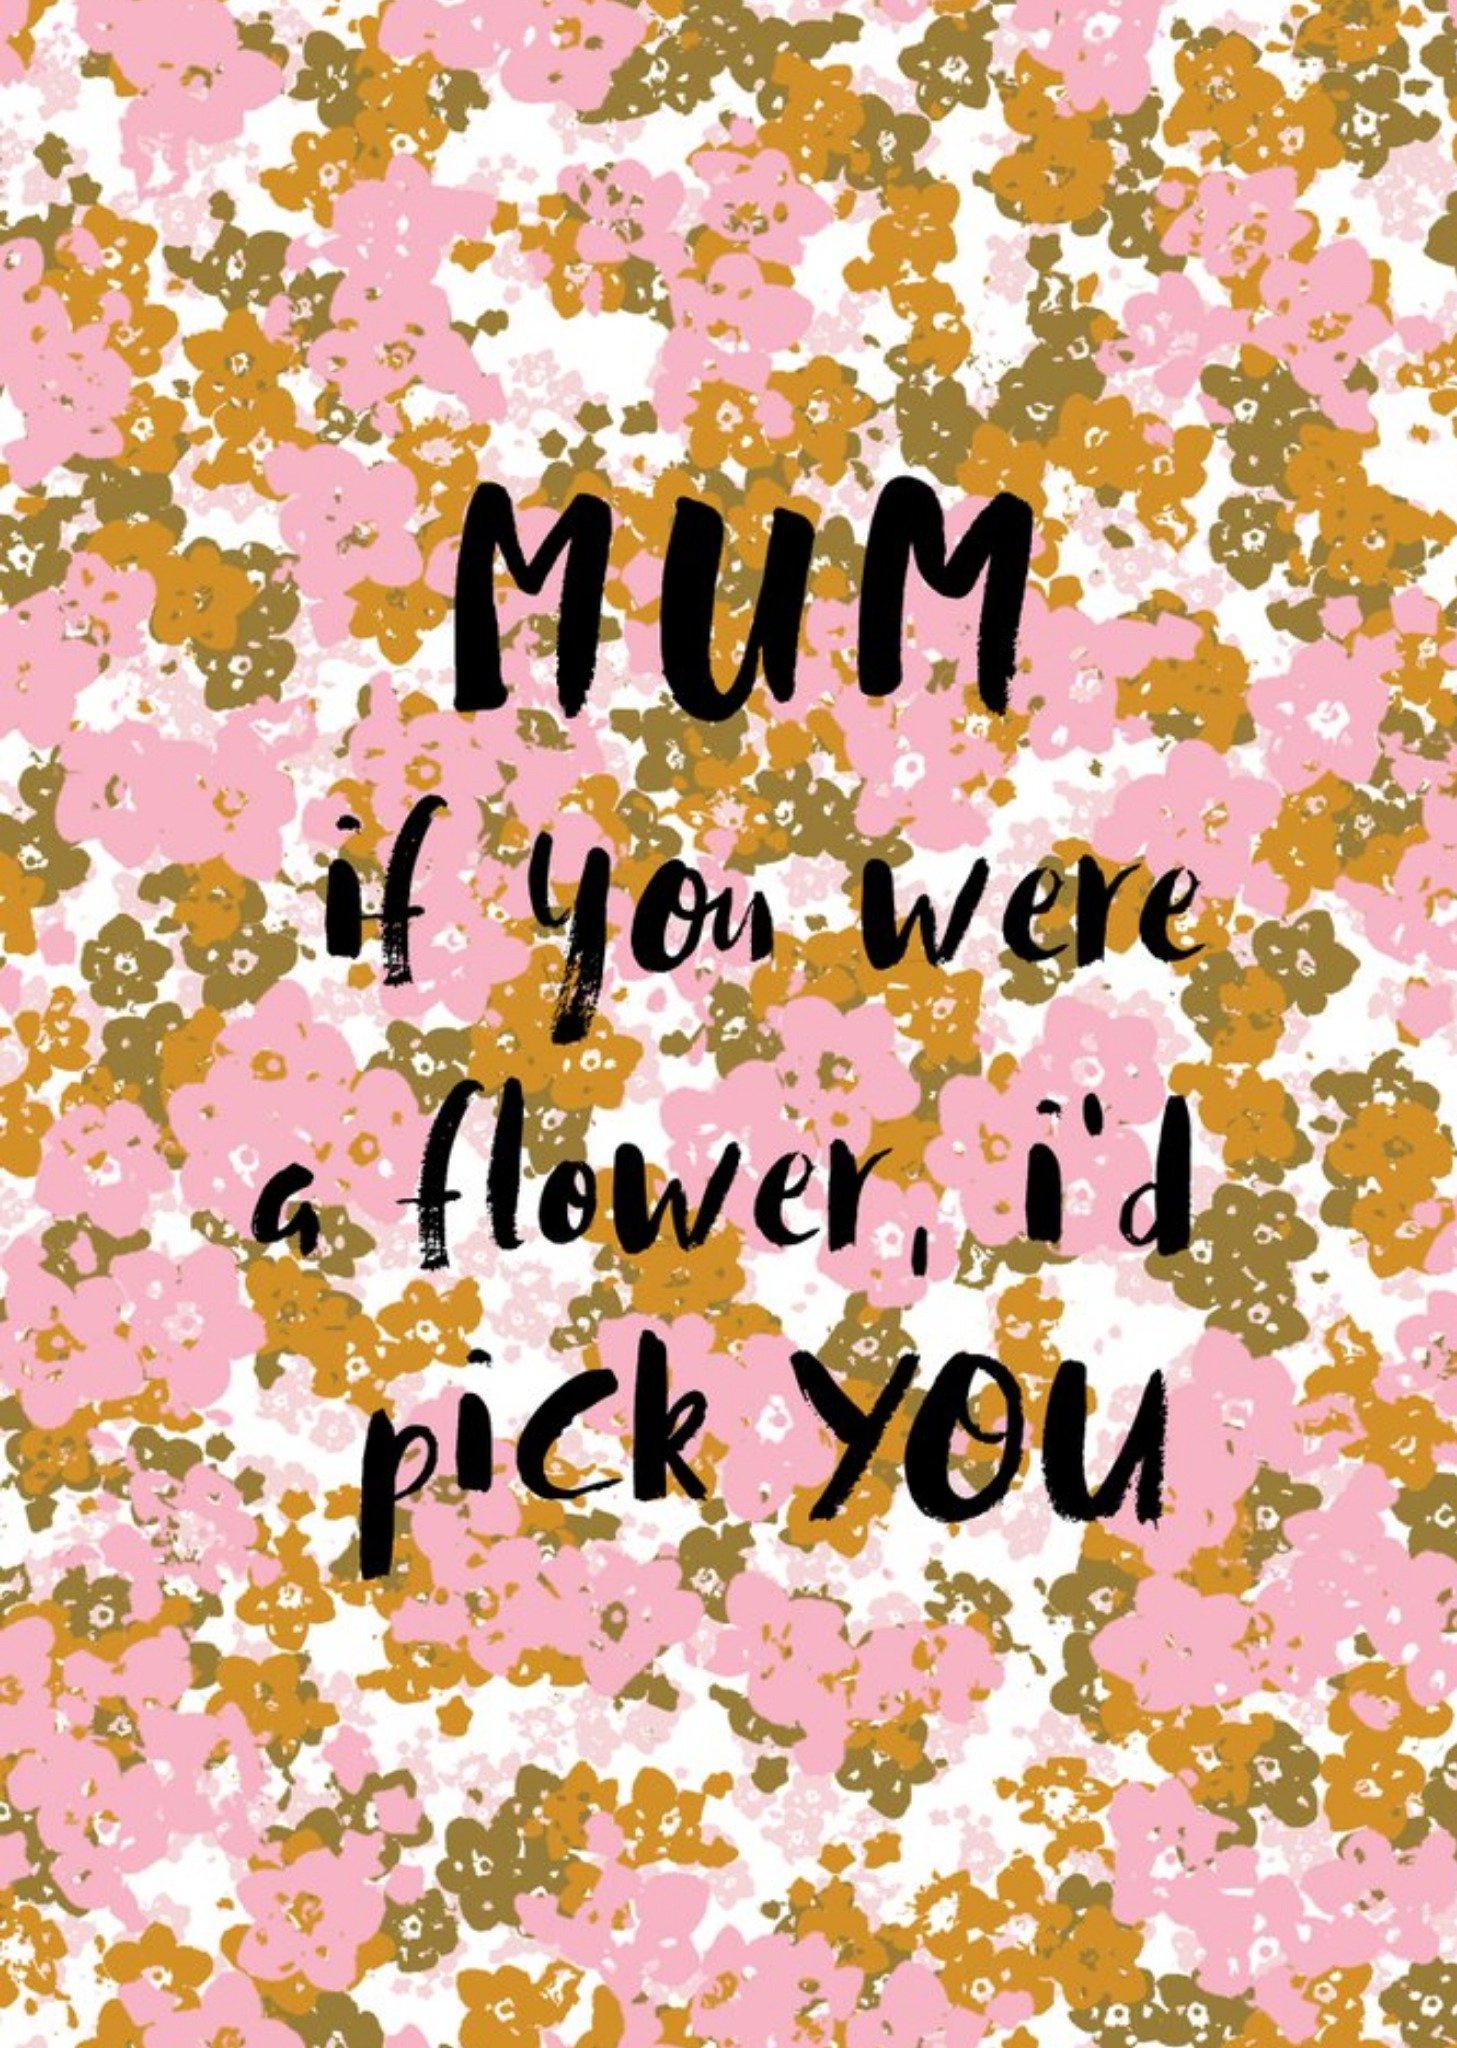 Moonpig Typography On A Floral Patterned Background Mum's Birthday Card, Large